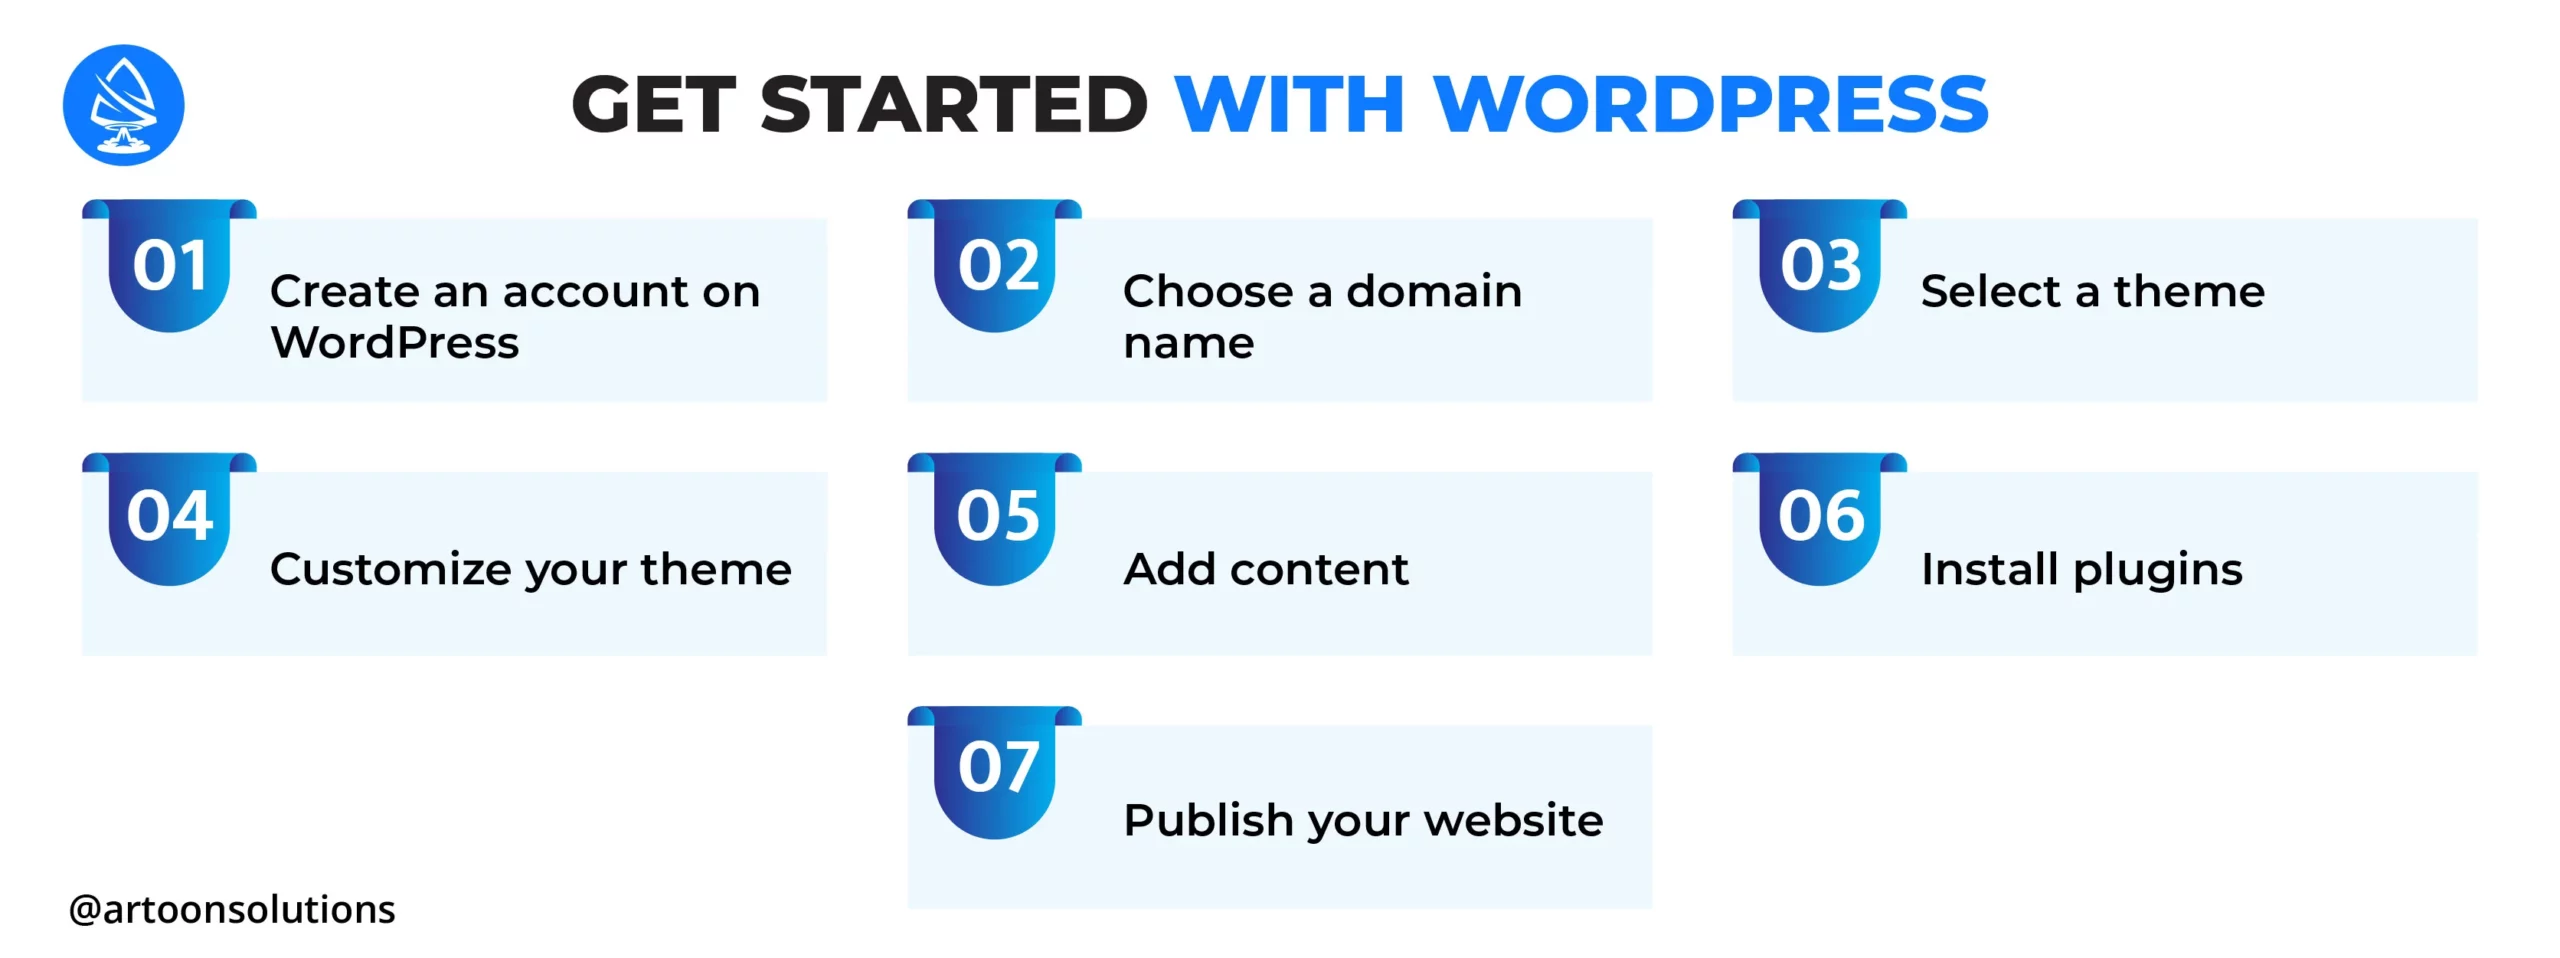 To get started with WordPress, simply follow these steps